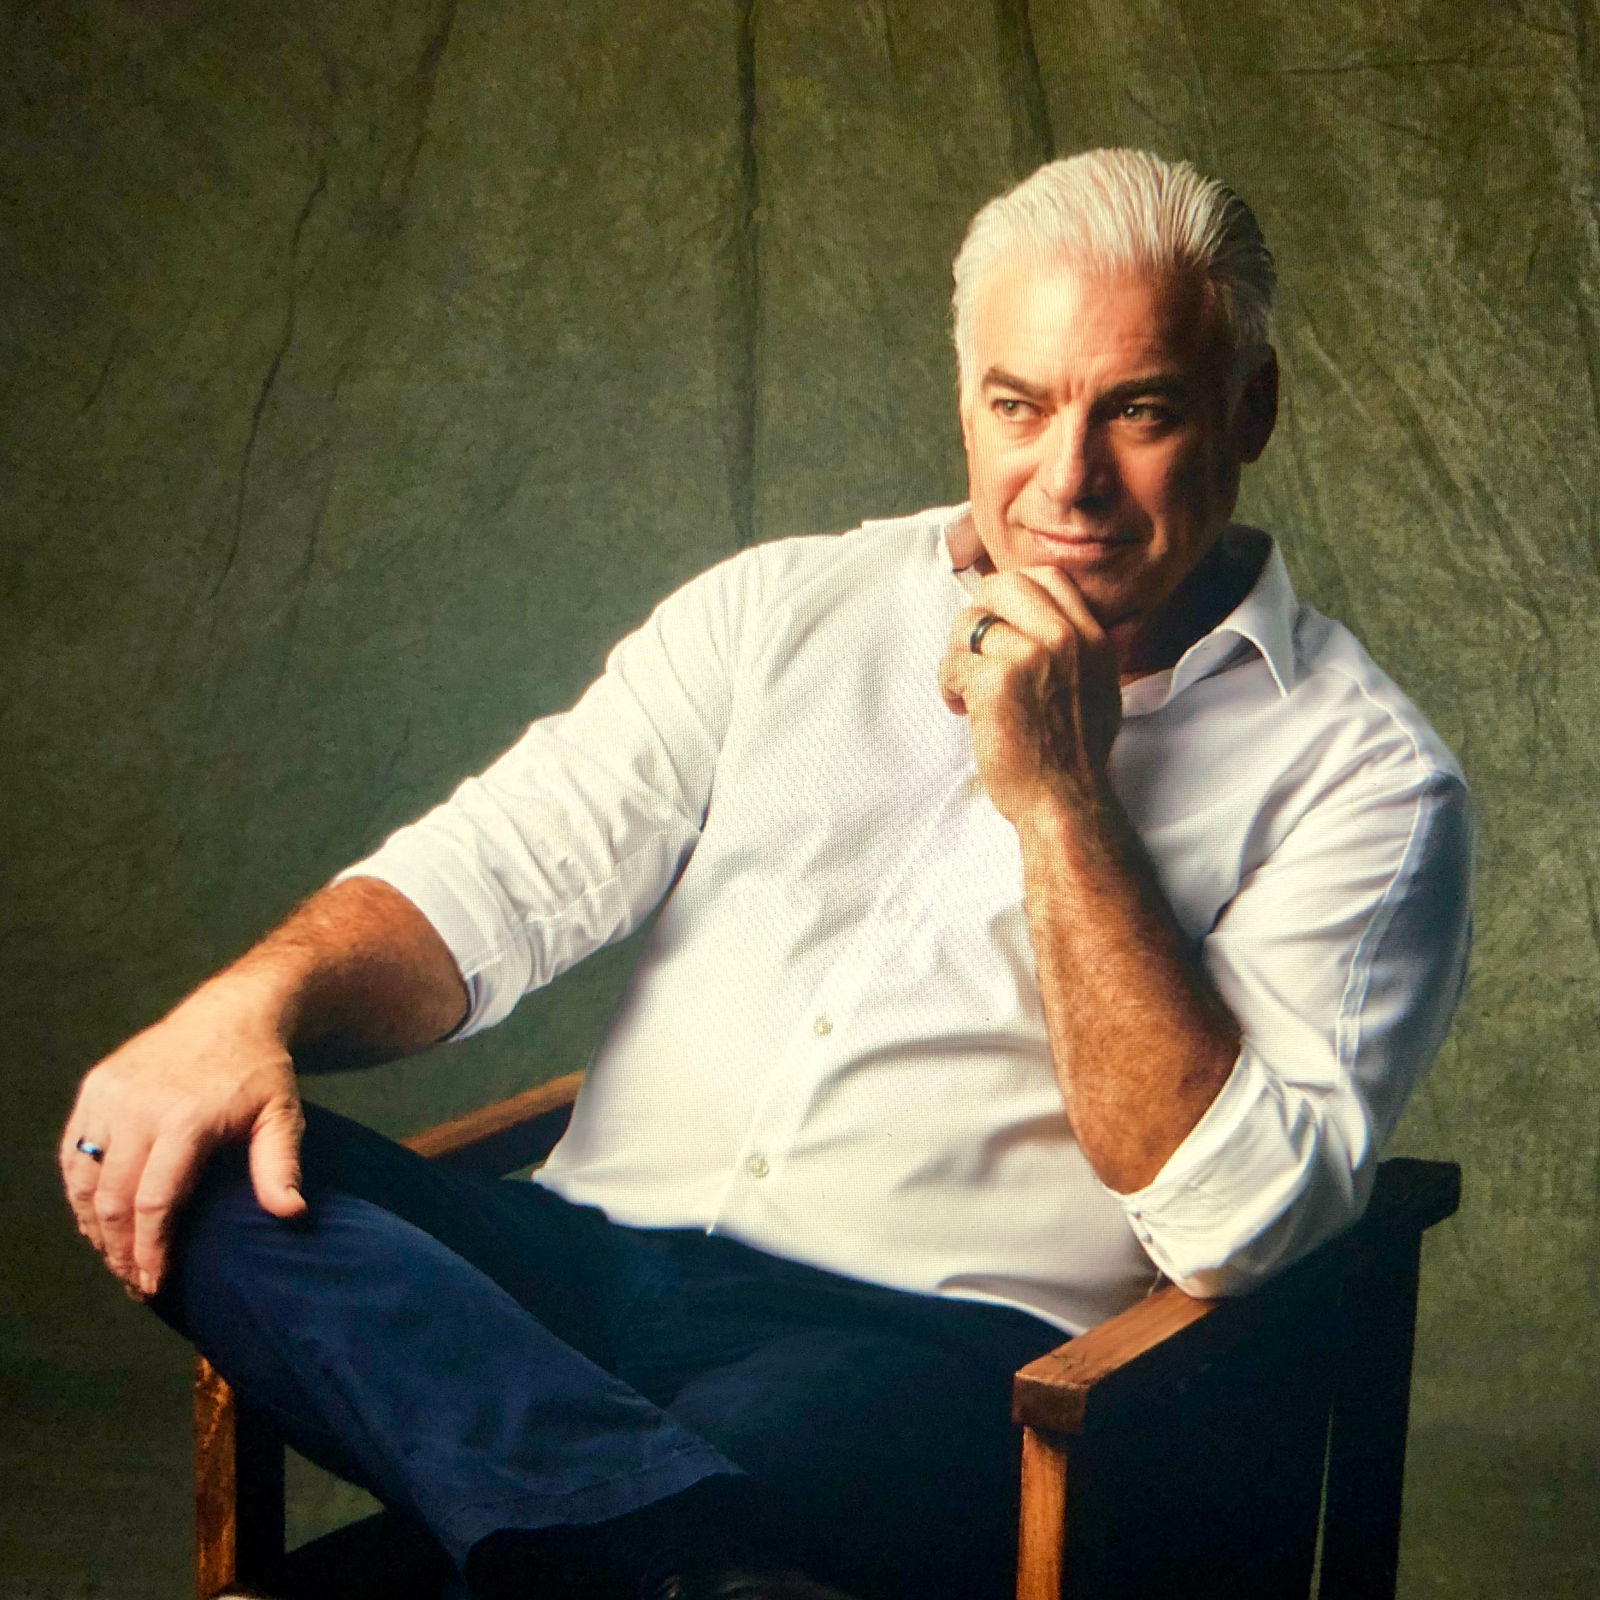 Frank Stephenson, legendary designer and host of the podcast “The Fate Creators”.